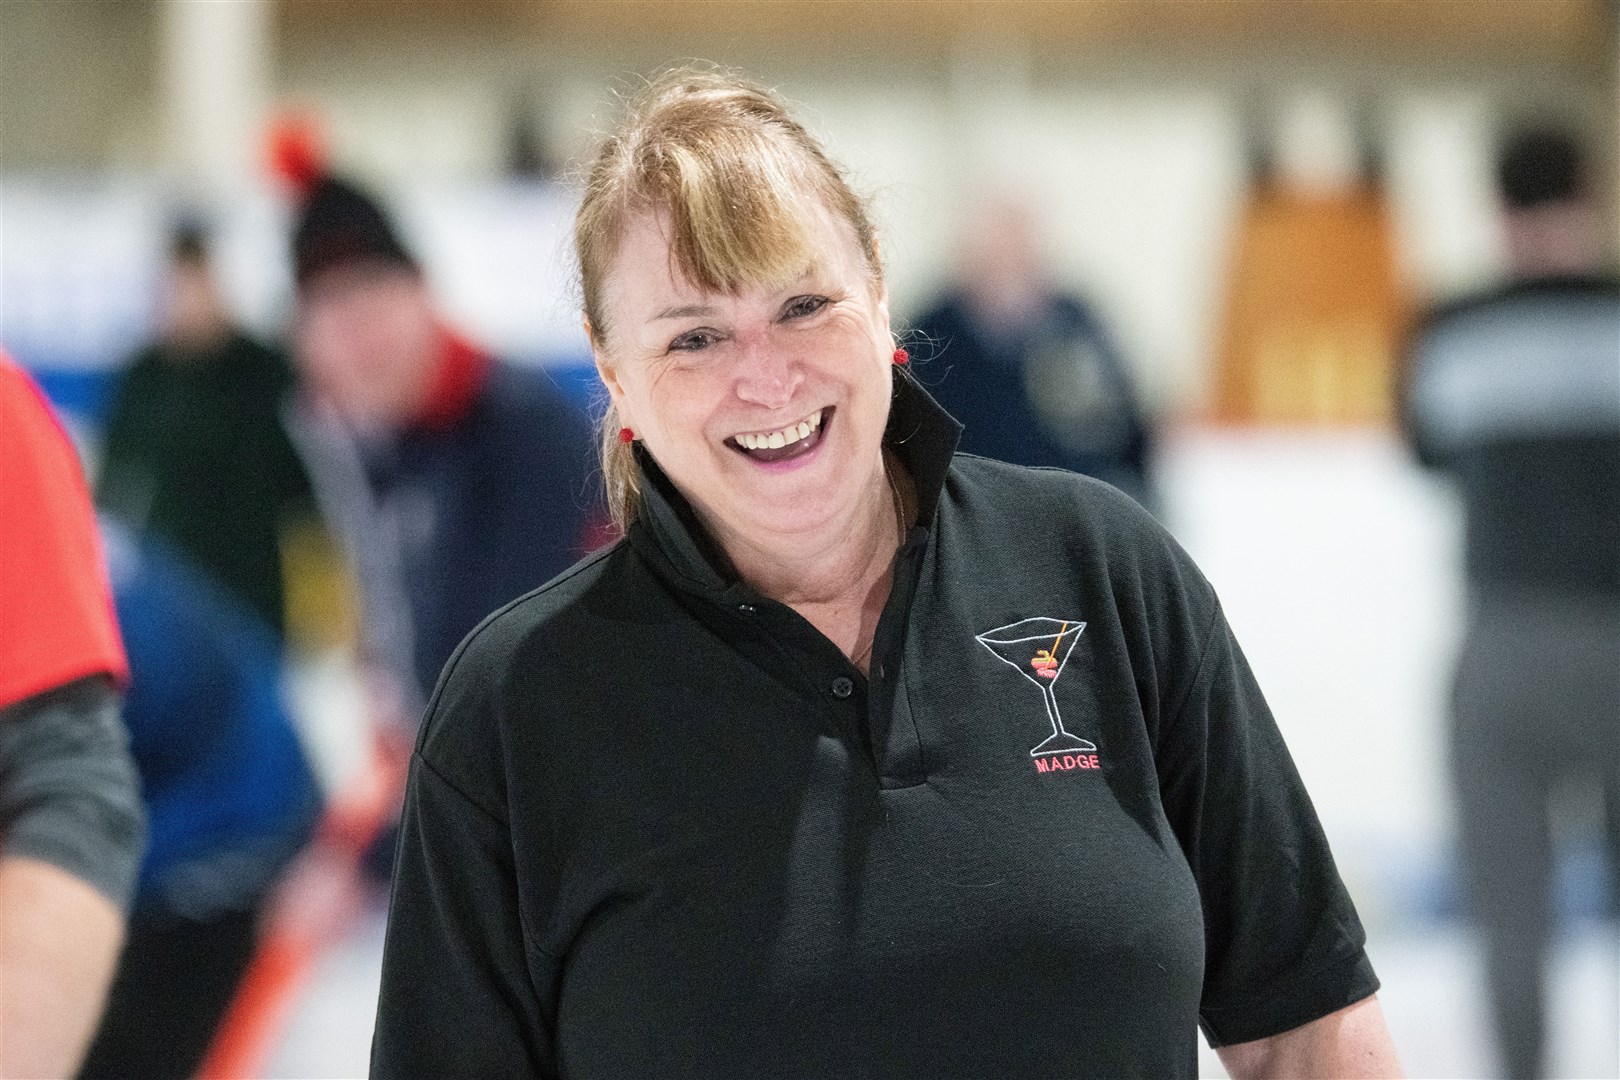 Majorie Christie.14th annual Moray International Bonspiel - held at Moray Leisure Centre. Picture: Daniel Forsyth.